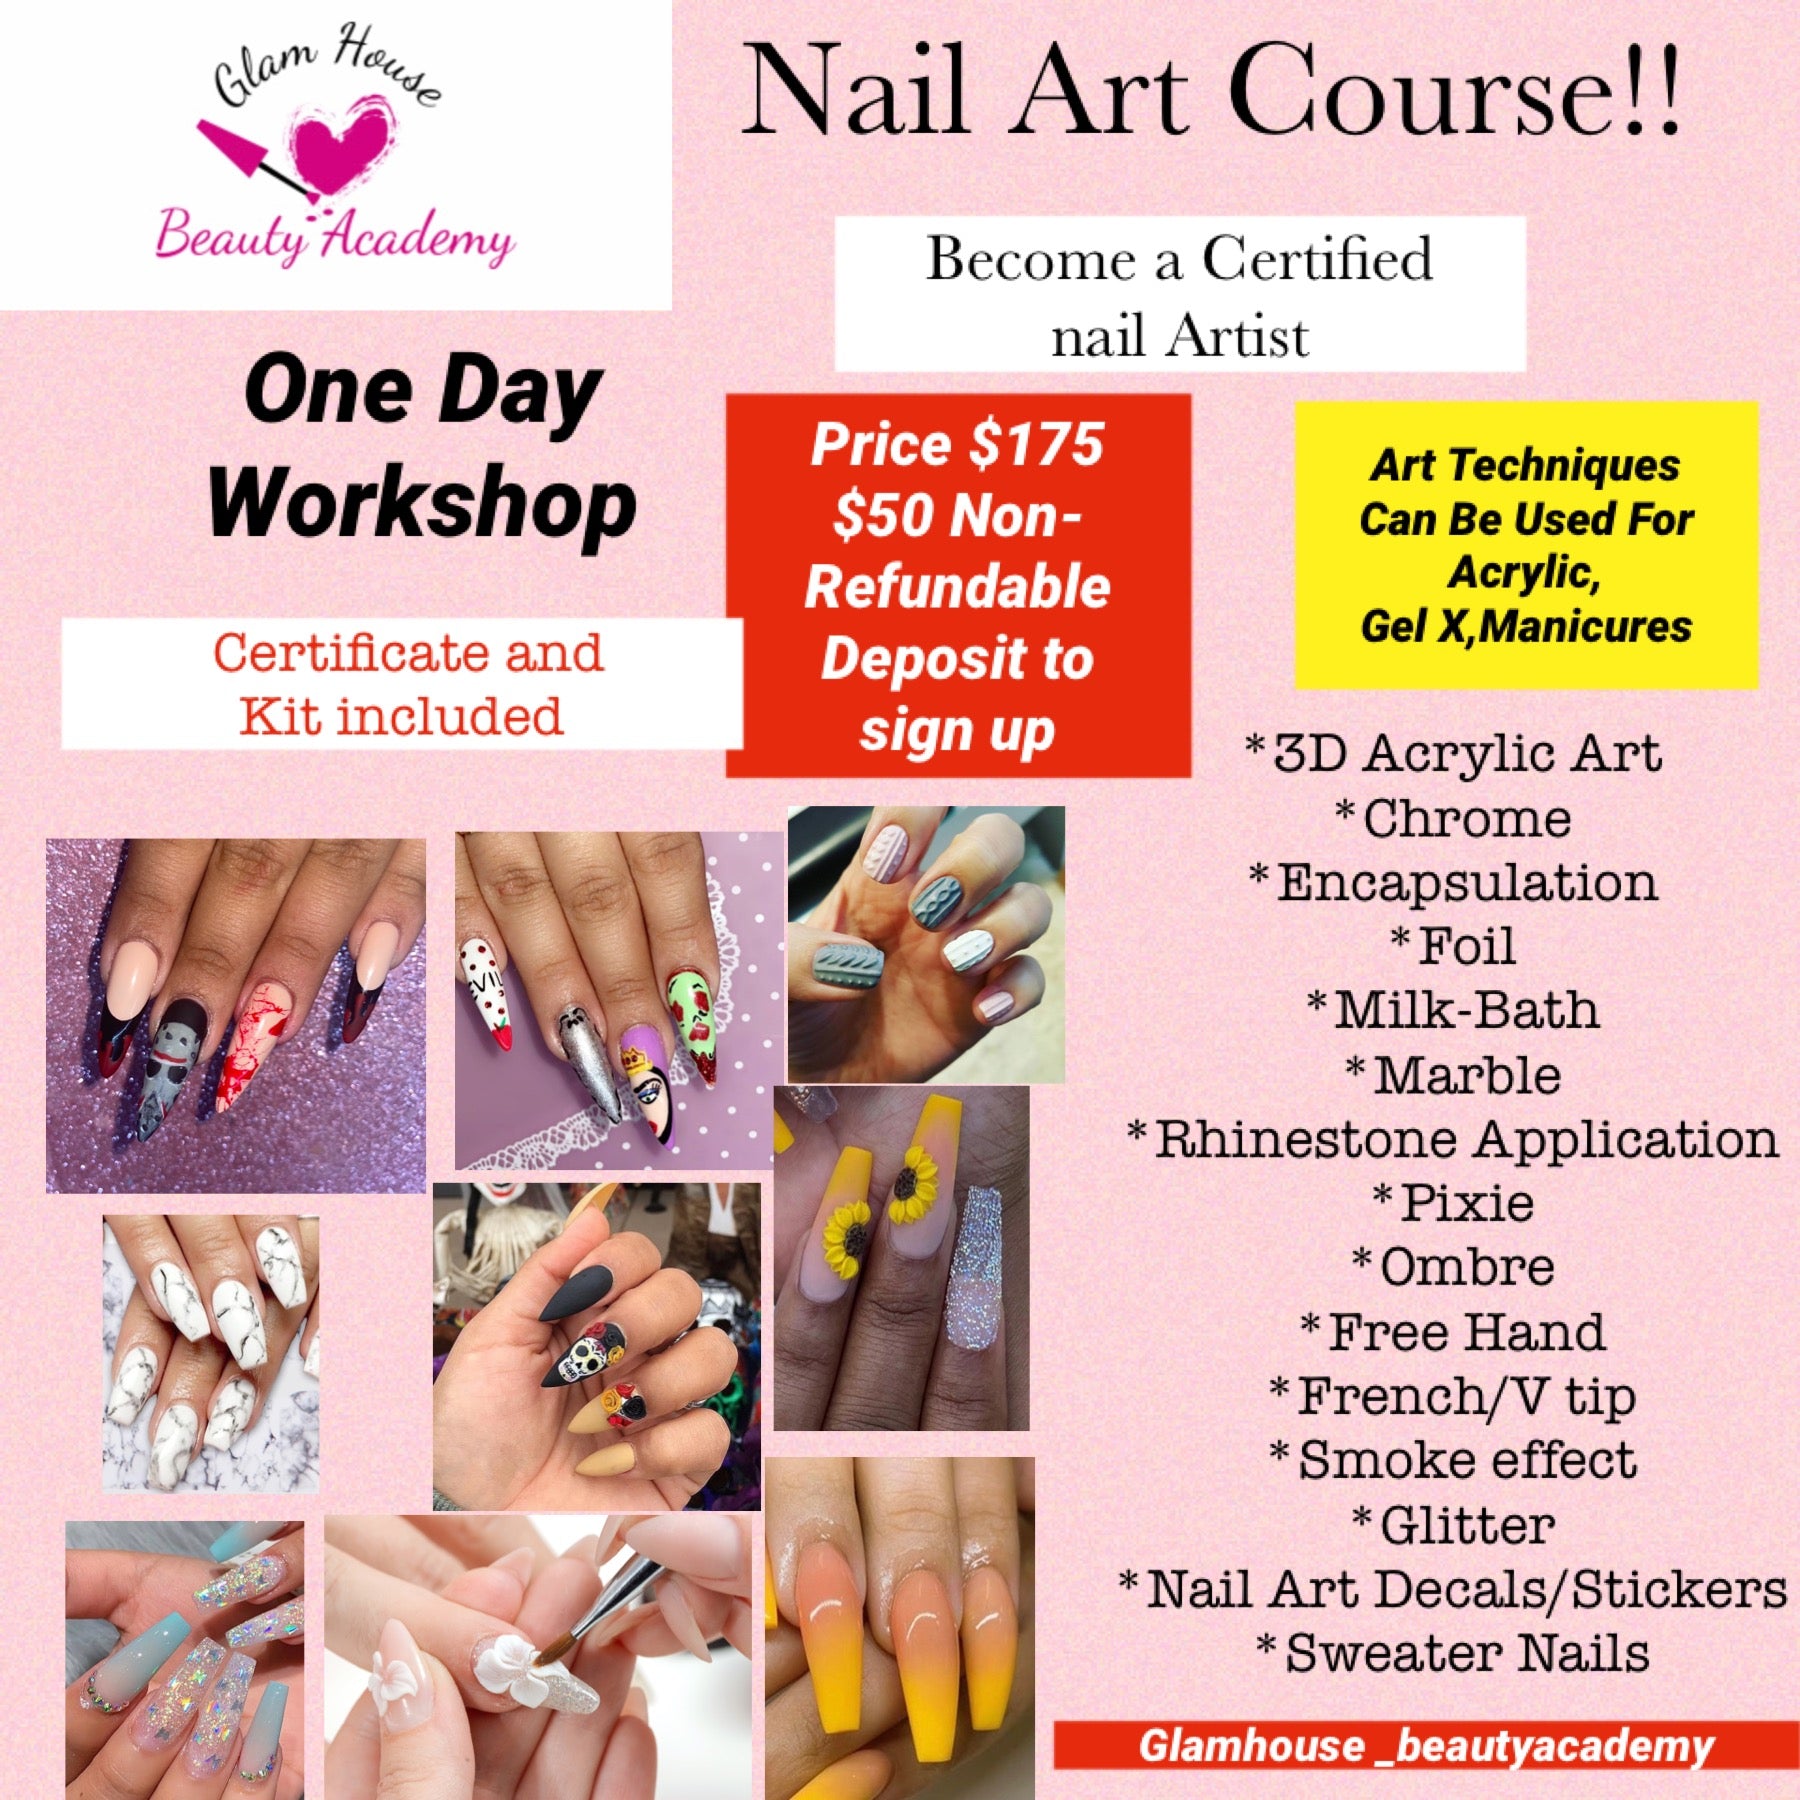 Nail Technician Qualifications: Choose the Right Nail Courses